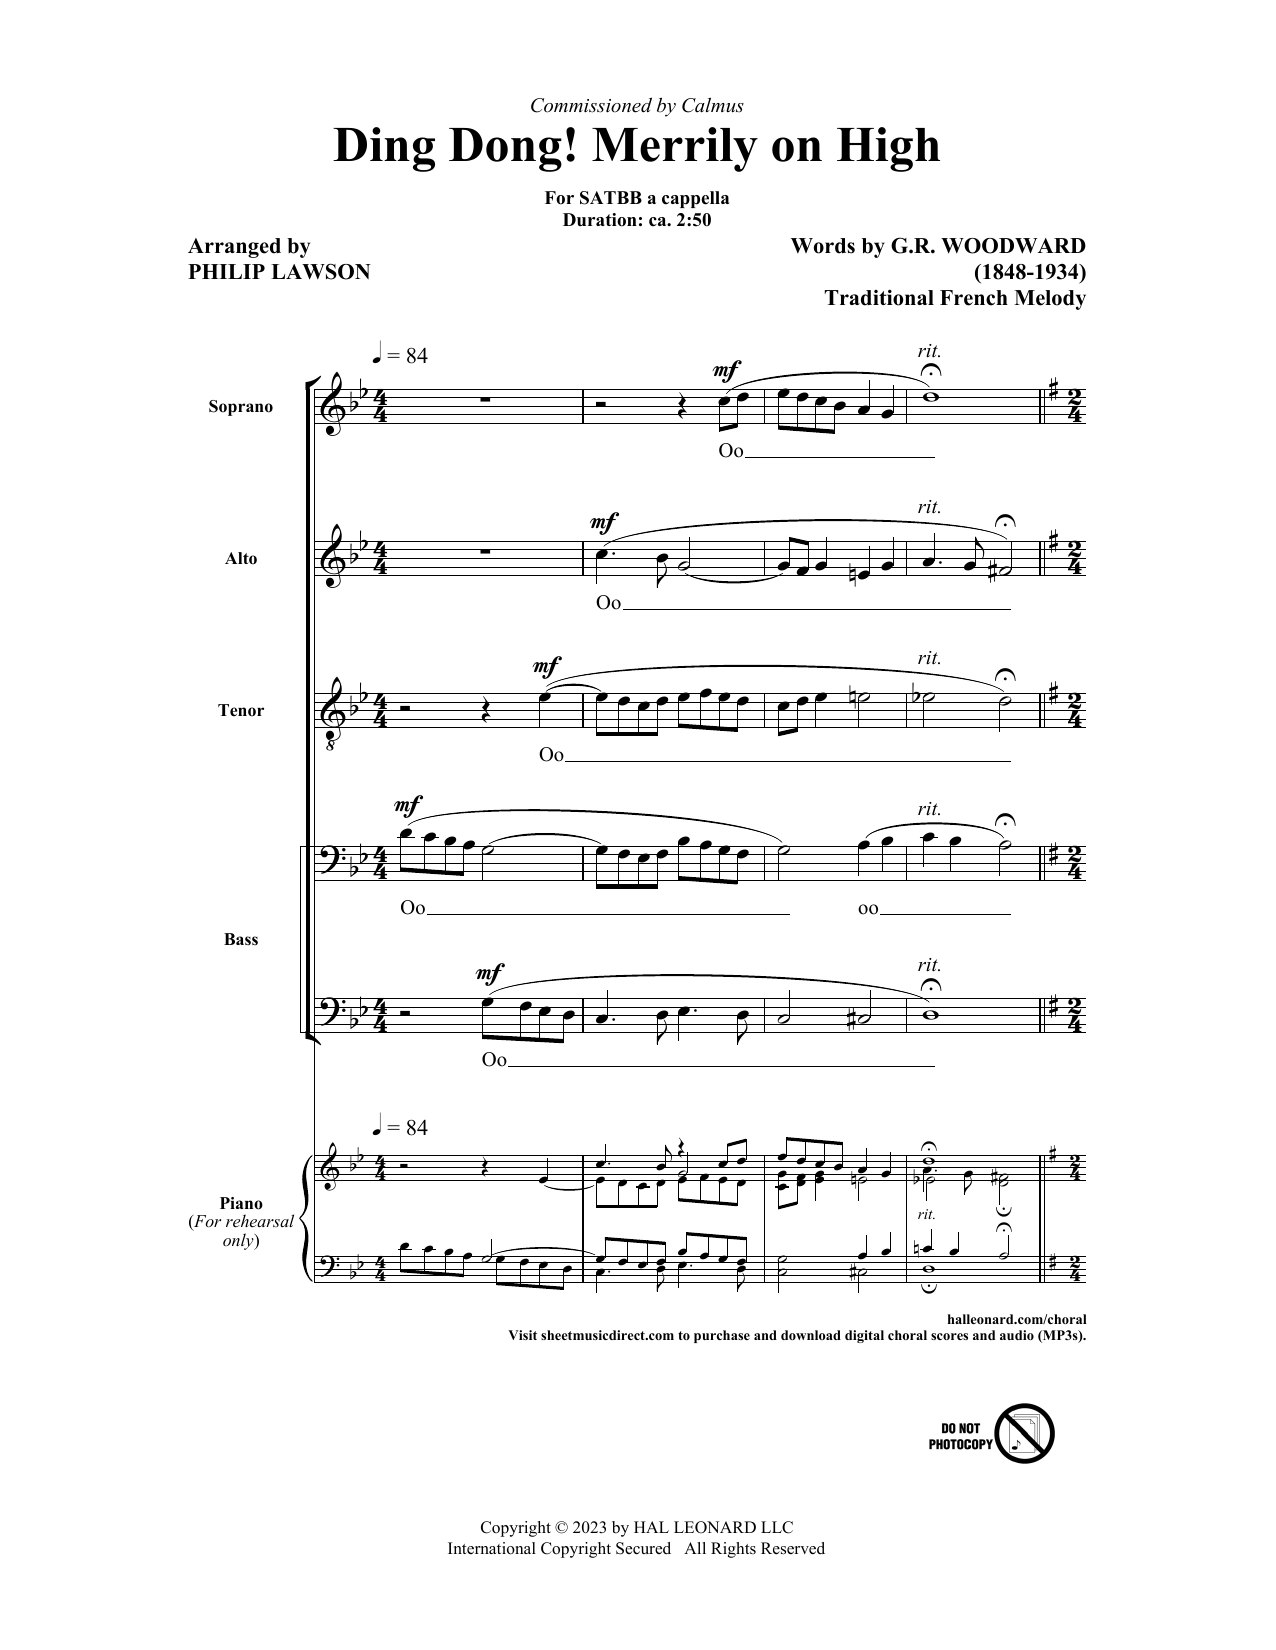 Traditional French Carol Ding Dong! Merrily On High (arr. Philip Lawson) sheet music notes printable PDF score